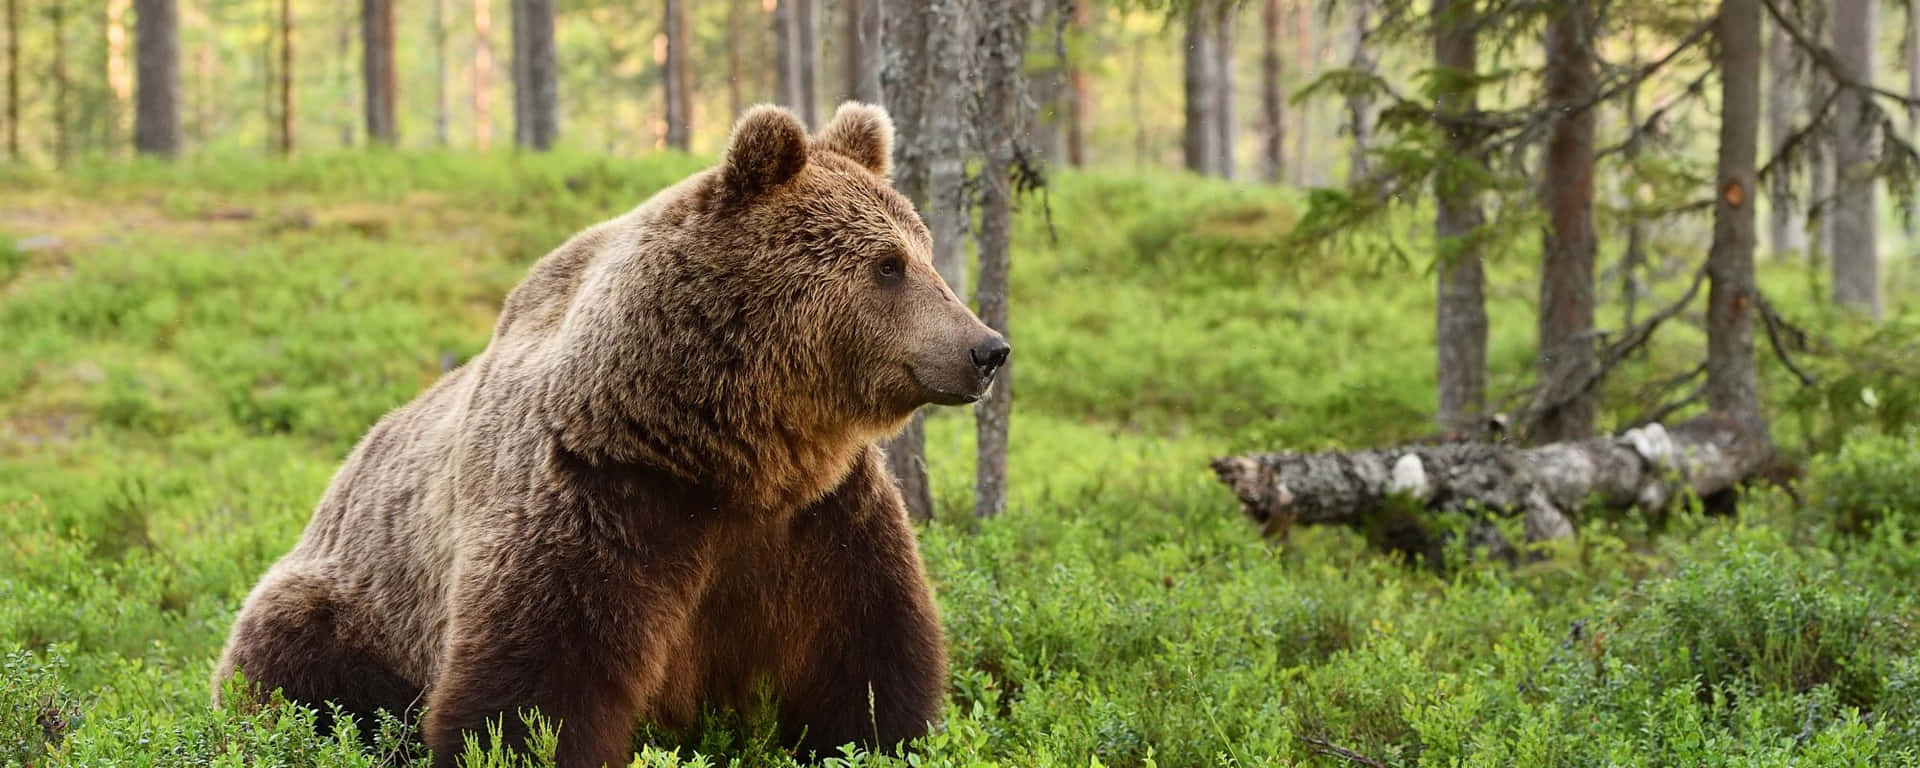 "A young Brown Bear studies its surroundings in an alpine meadow."